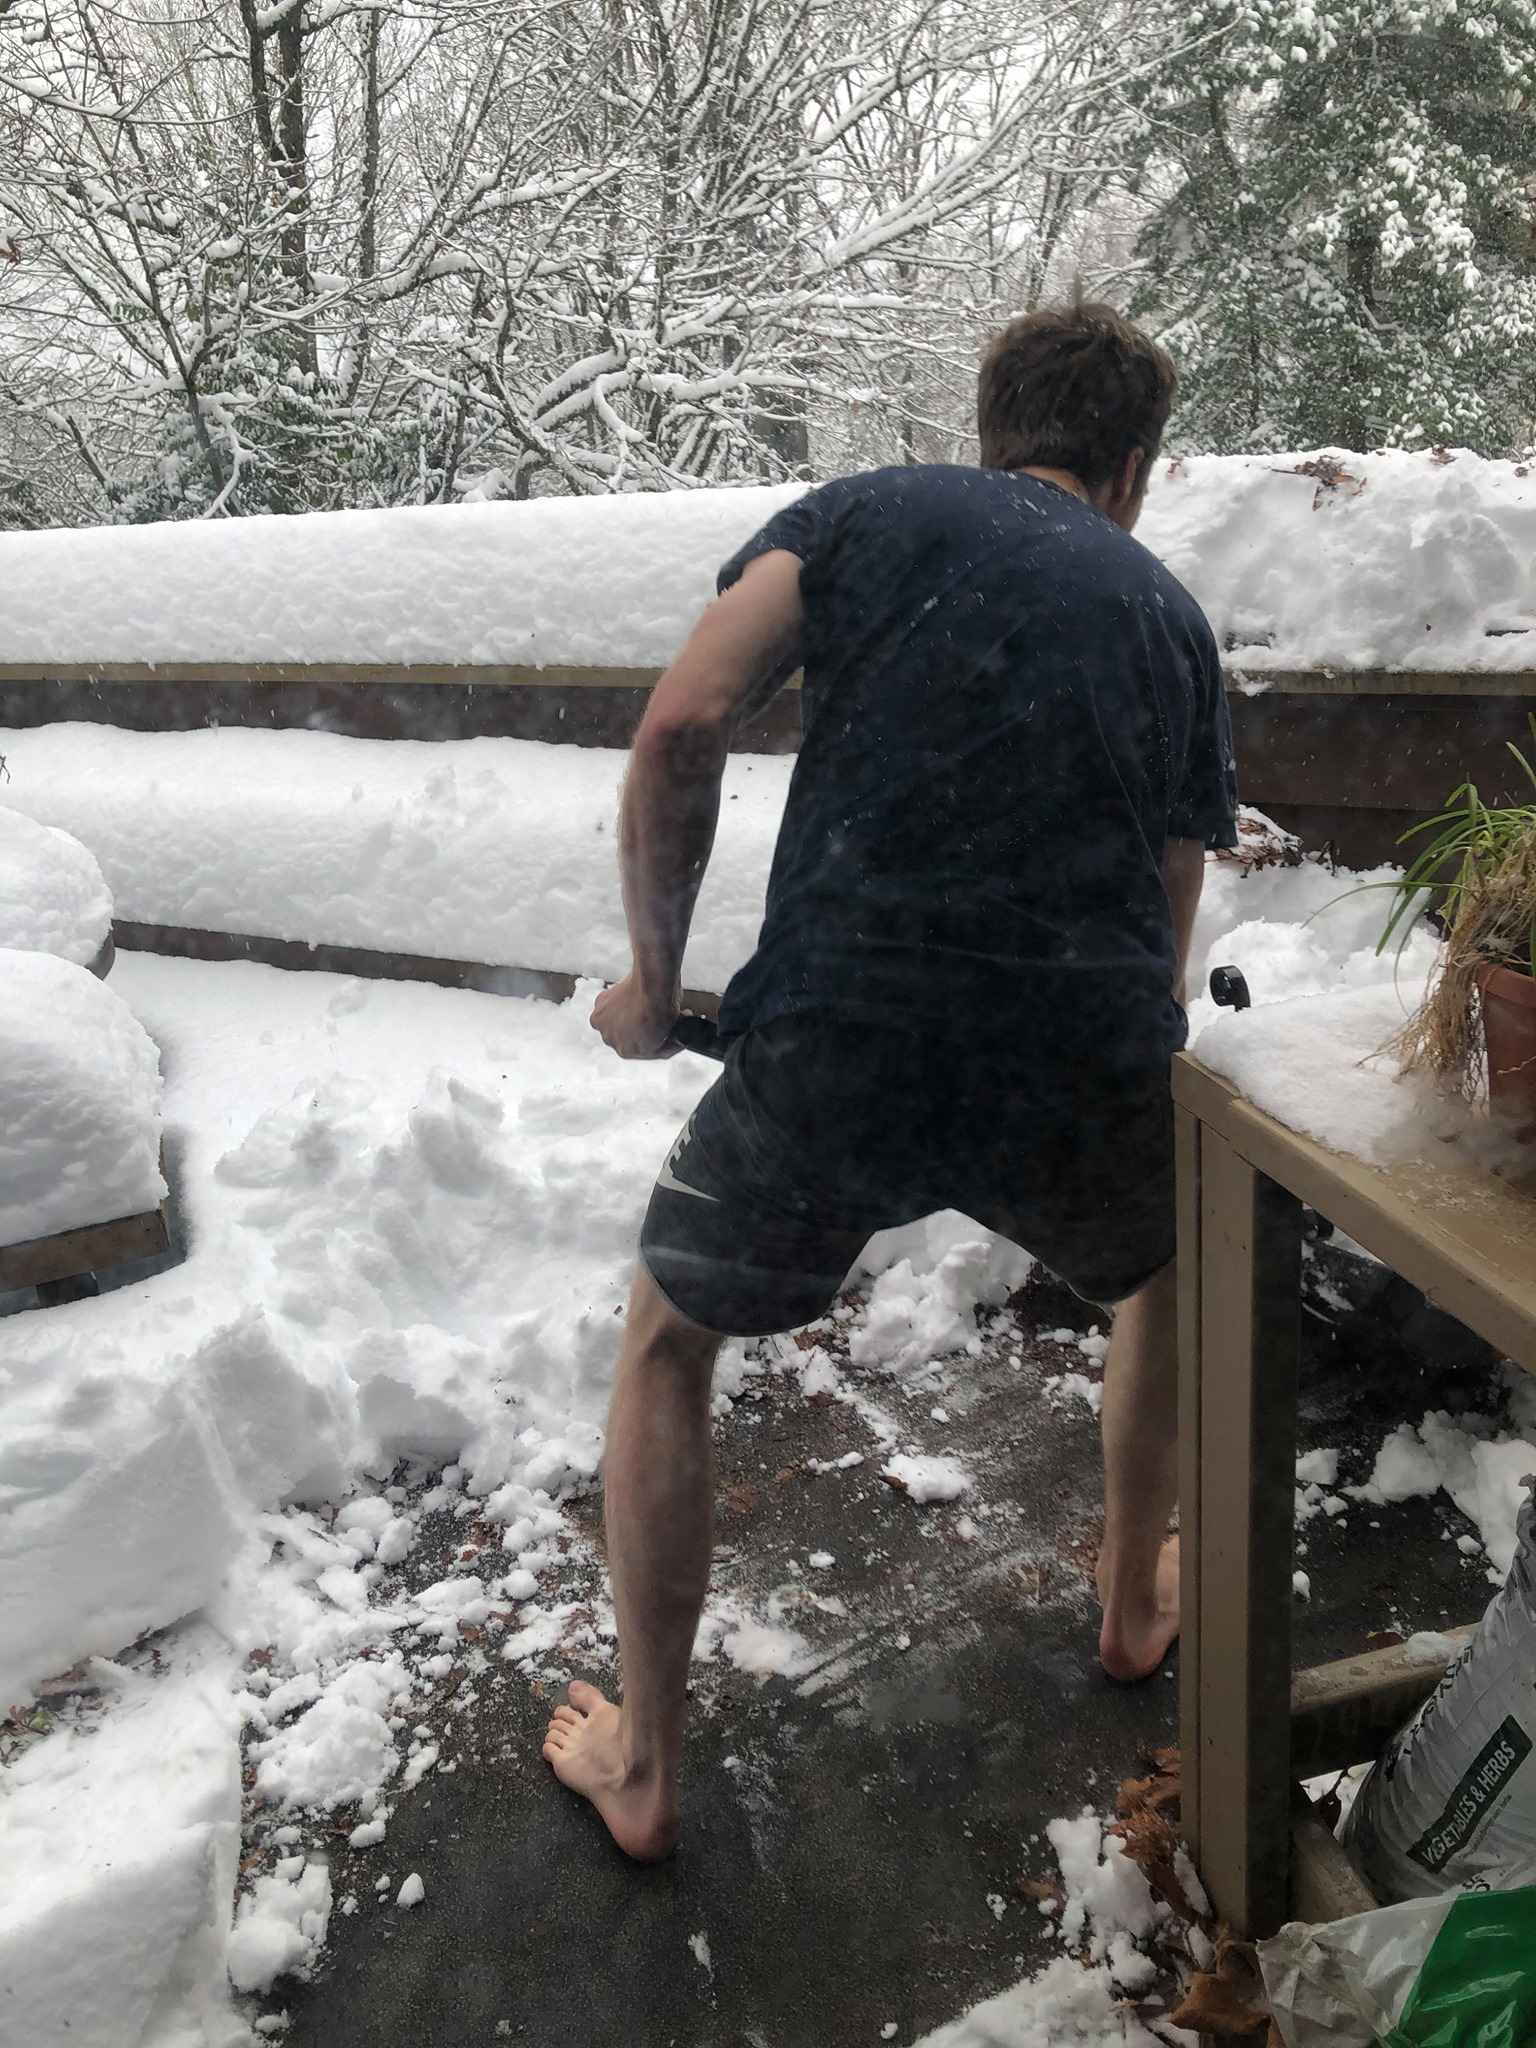 Shoveling snow barefoot in shorts and a t-shirt